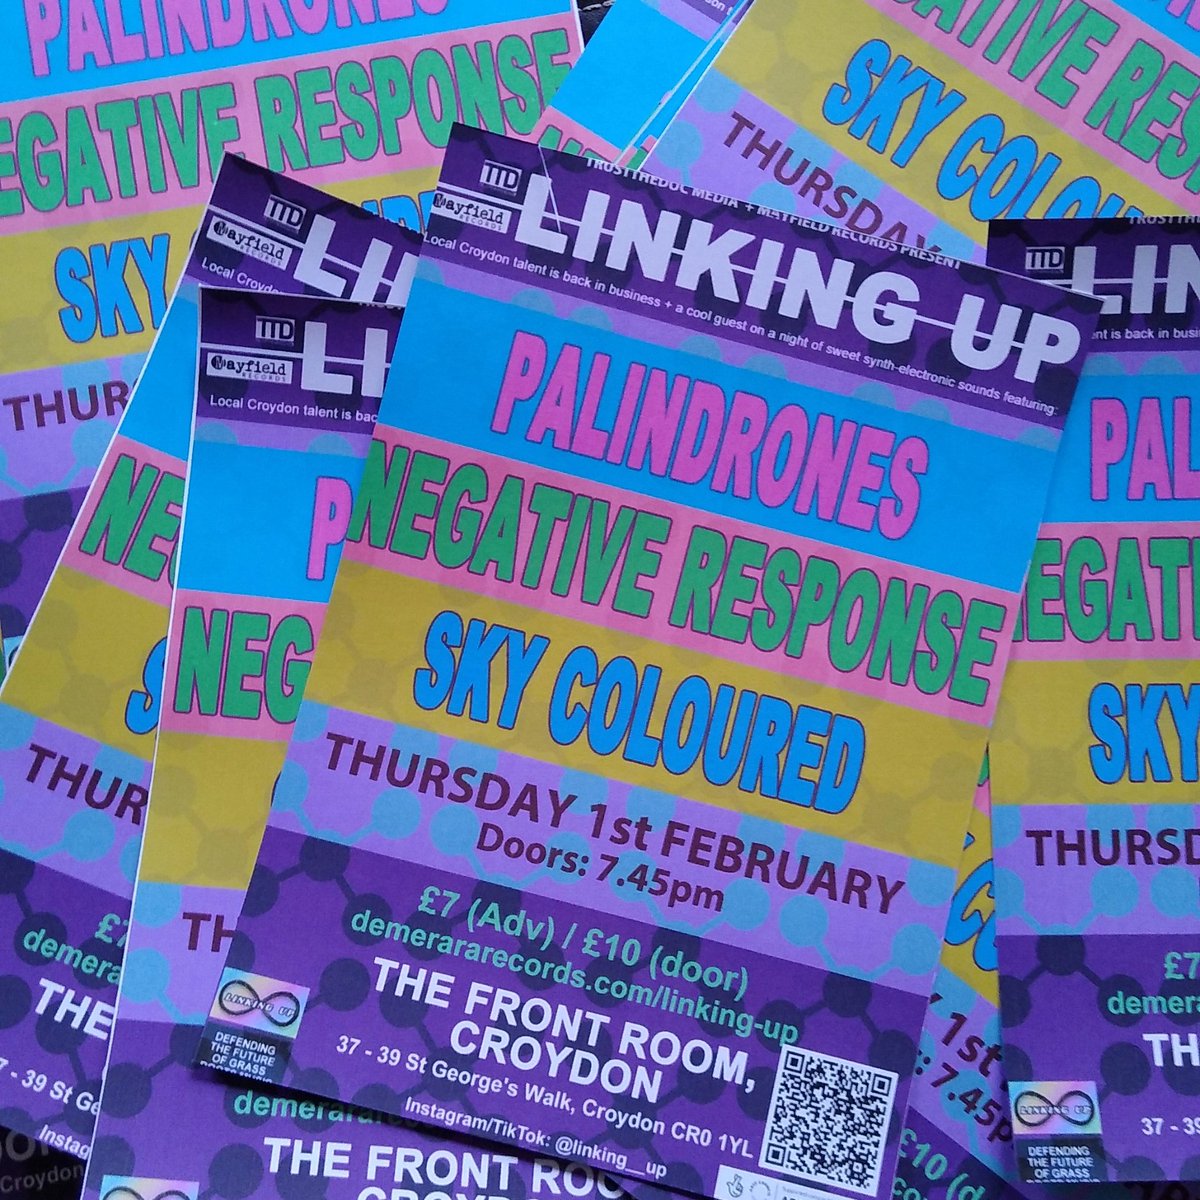 Out today with #Flyers for our next #livegig in #croydon #southlondon with #palendrones & @skycolouredband on 1 Feb presented by @TrustTheDocUK #music #London #electronicmusic #synth #indiemusic #diymusic #darksynth #minimal #postpunk #electronica #Local trust-the-doc-media.eventcube.io/events/54467/l…